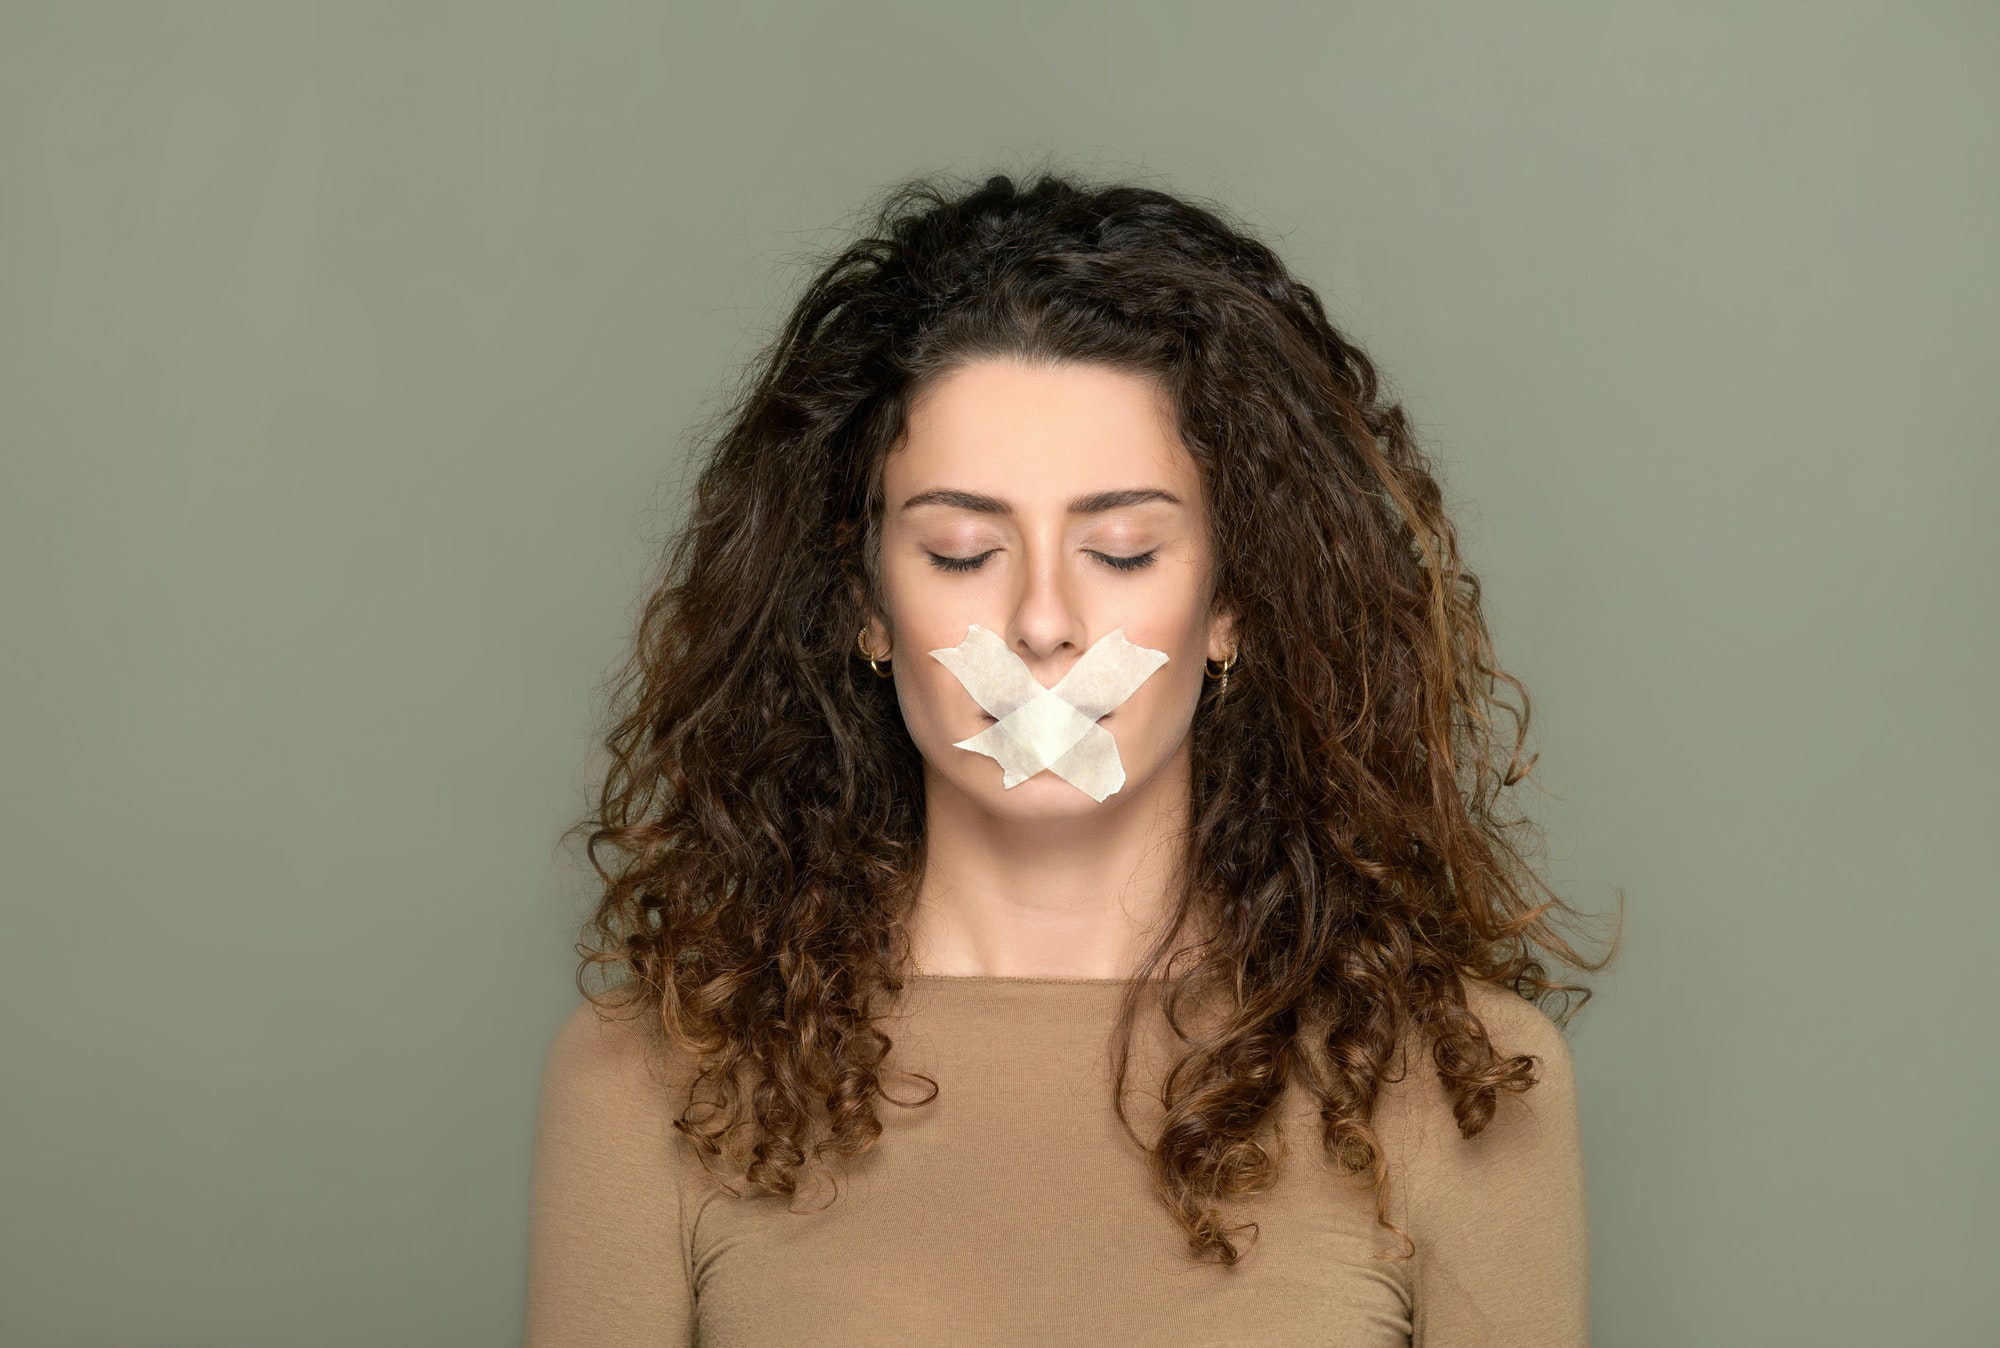 Young woman with closed eyes and taped lips